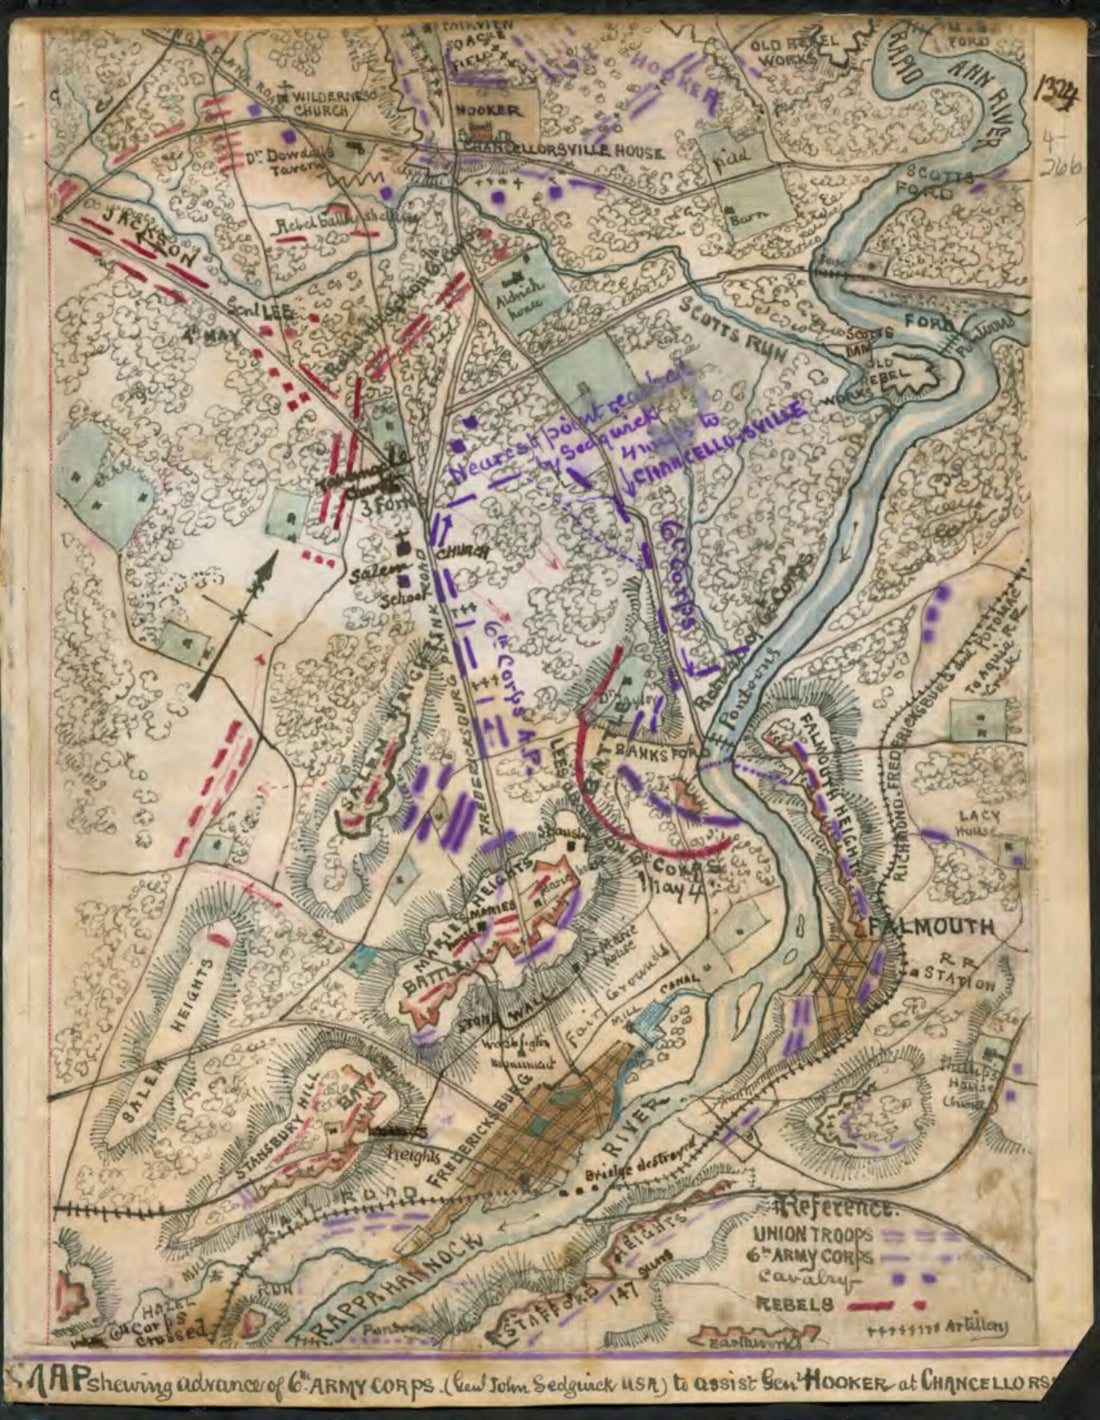 This old map of Map Shewing sic Advance of 6th Army Corps (Genl. John Sedgwick U.S.A.) to Assist Gen. Hooker at Chancellorsville from 1863 was created by Robert Knox Sneden in 1863